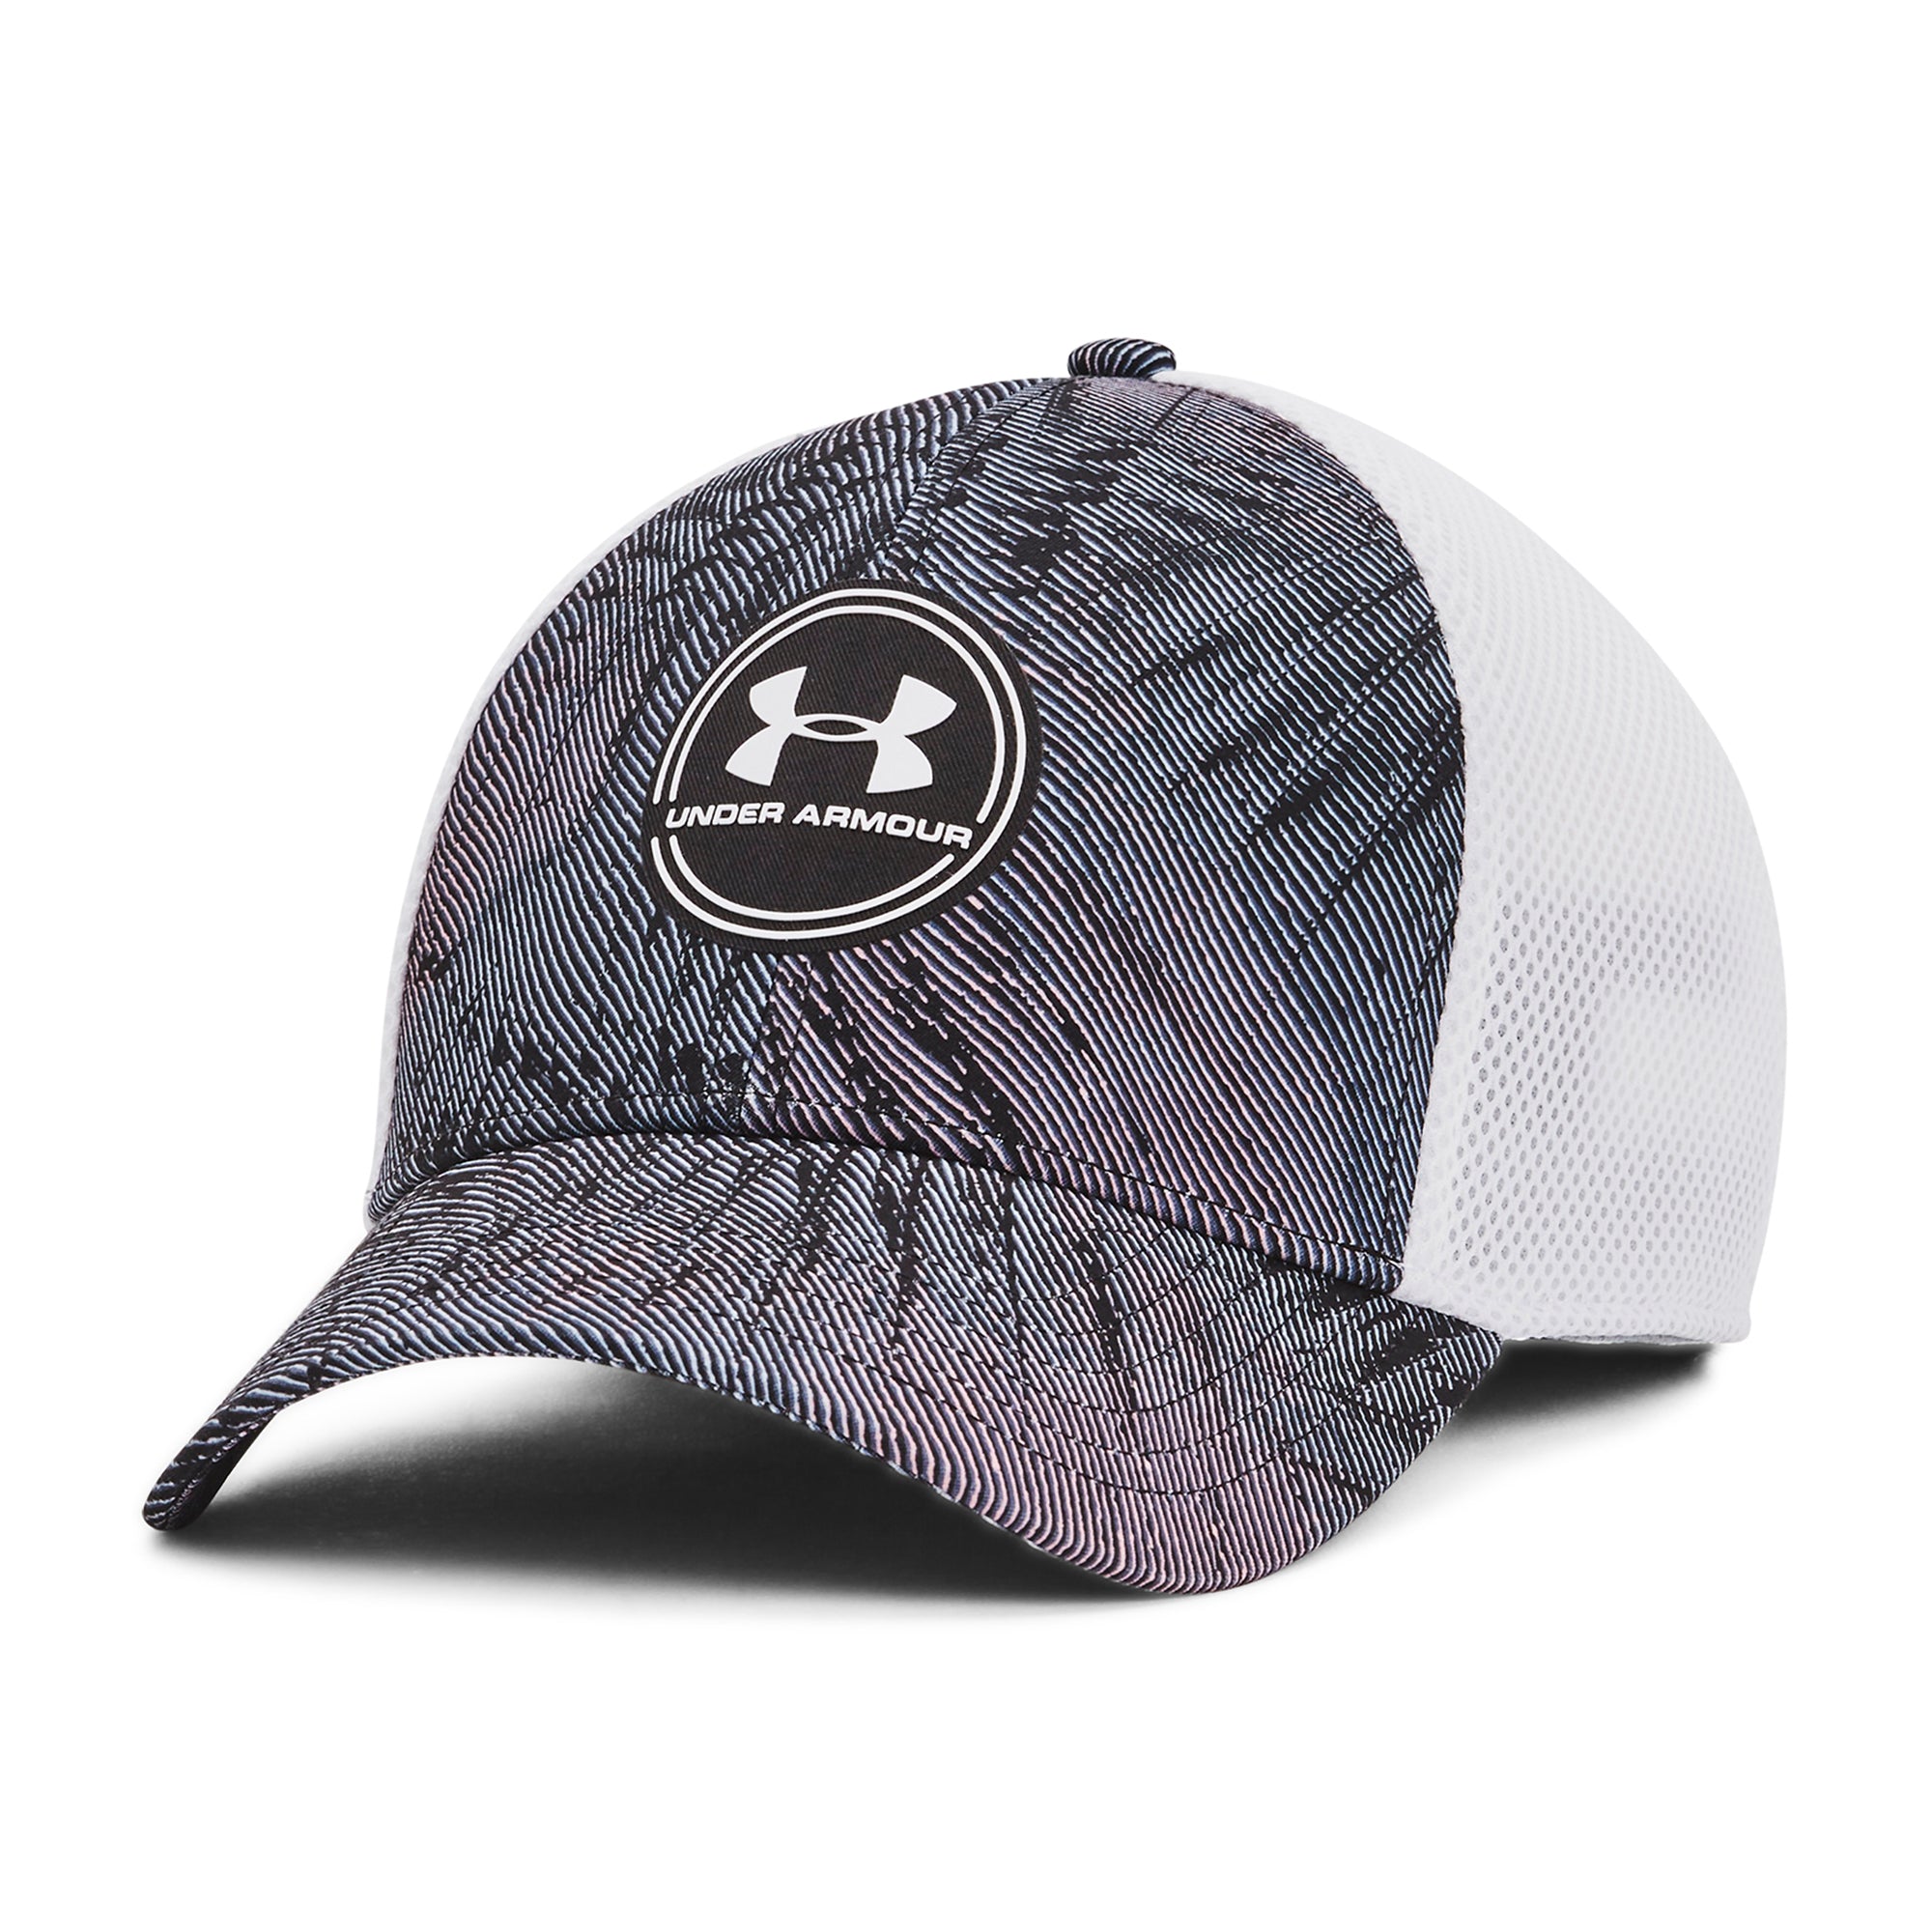 Under Armour Golf Iso-Chill Driver Mesh Cap Black M-L